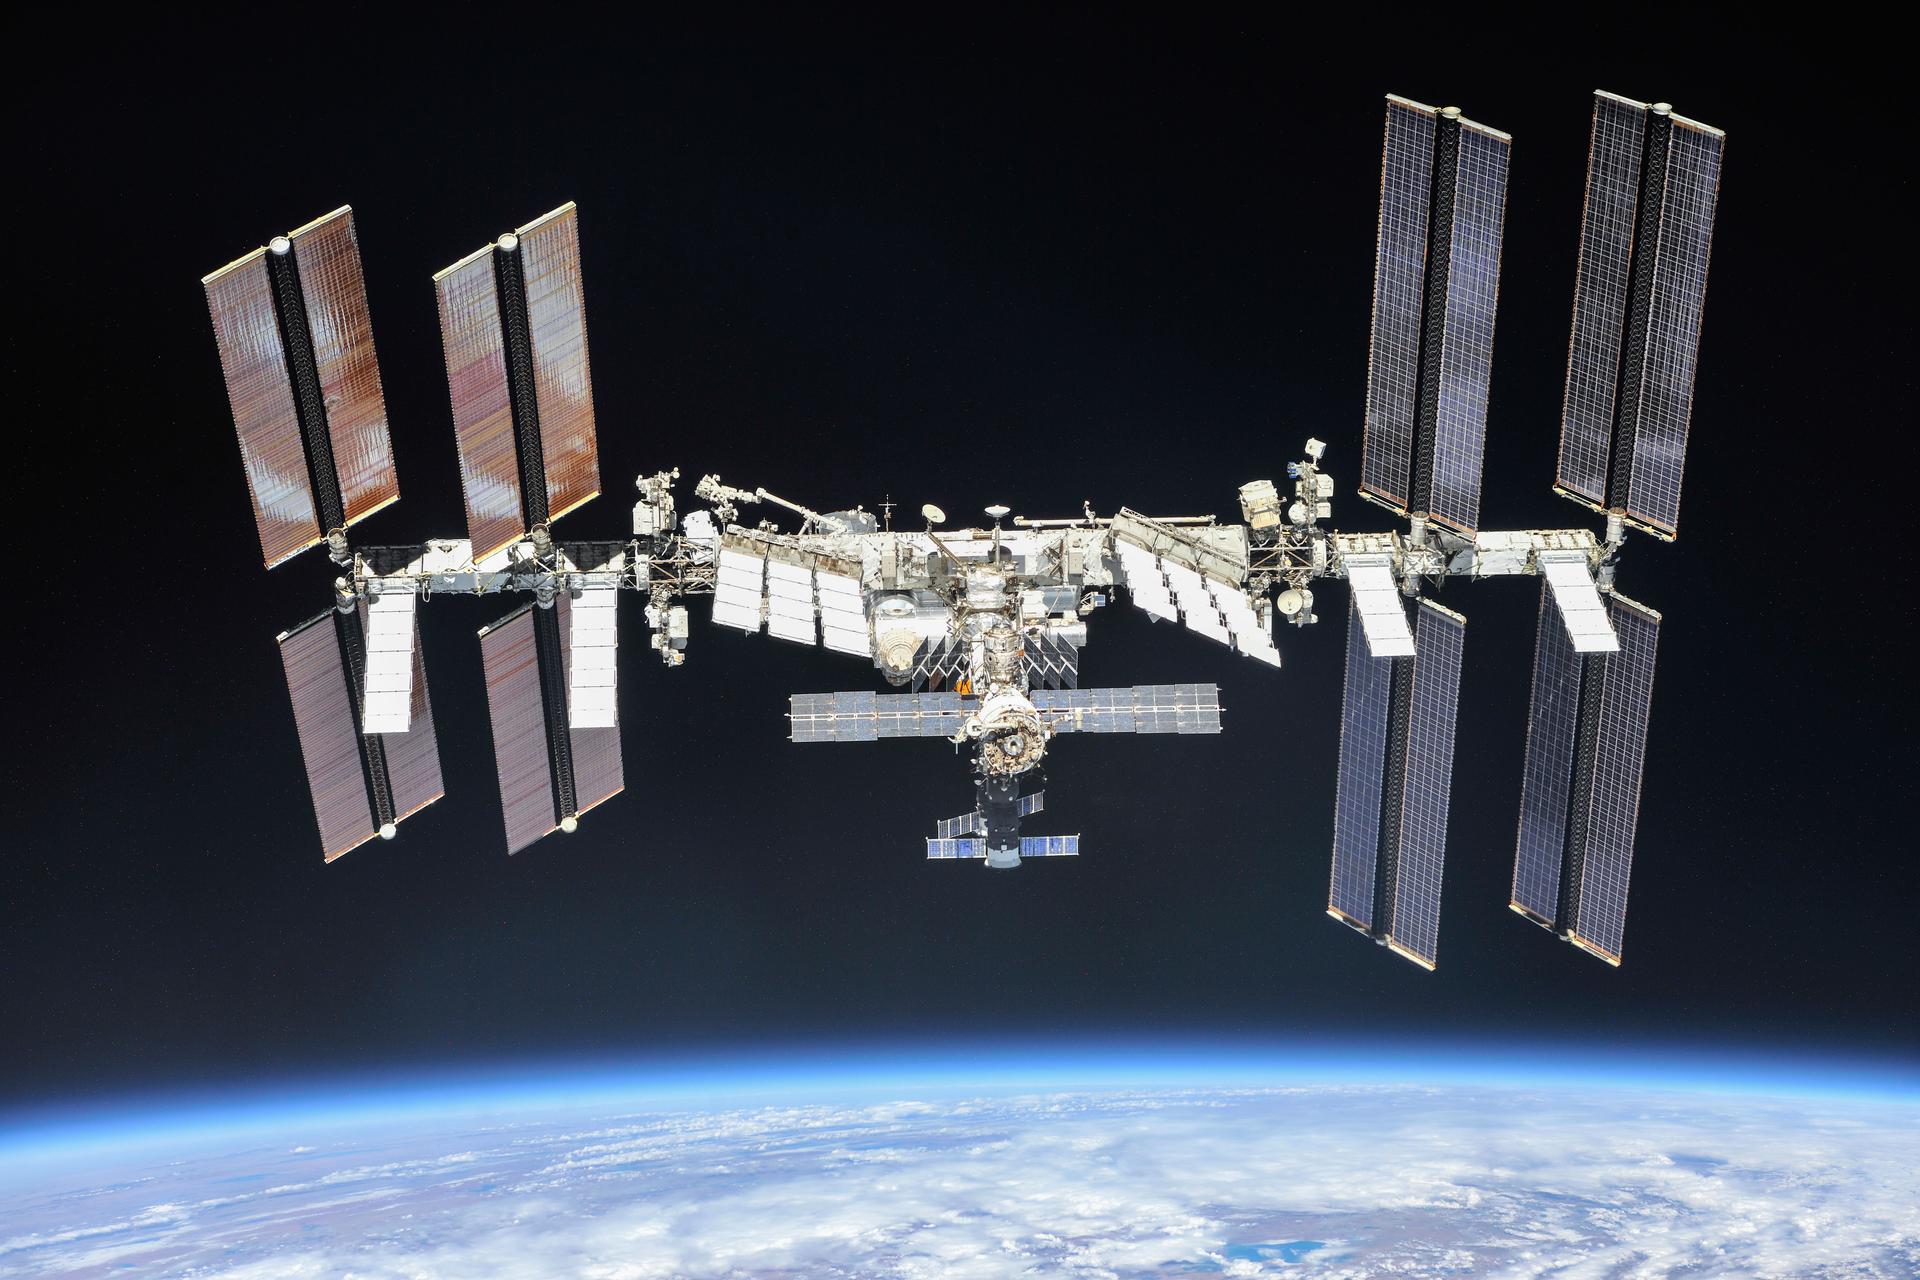 The International Space Station photographed by Expedition 56 crew members from a Soyuz spacecraft after undocking